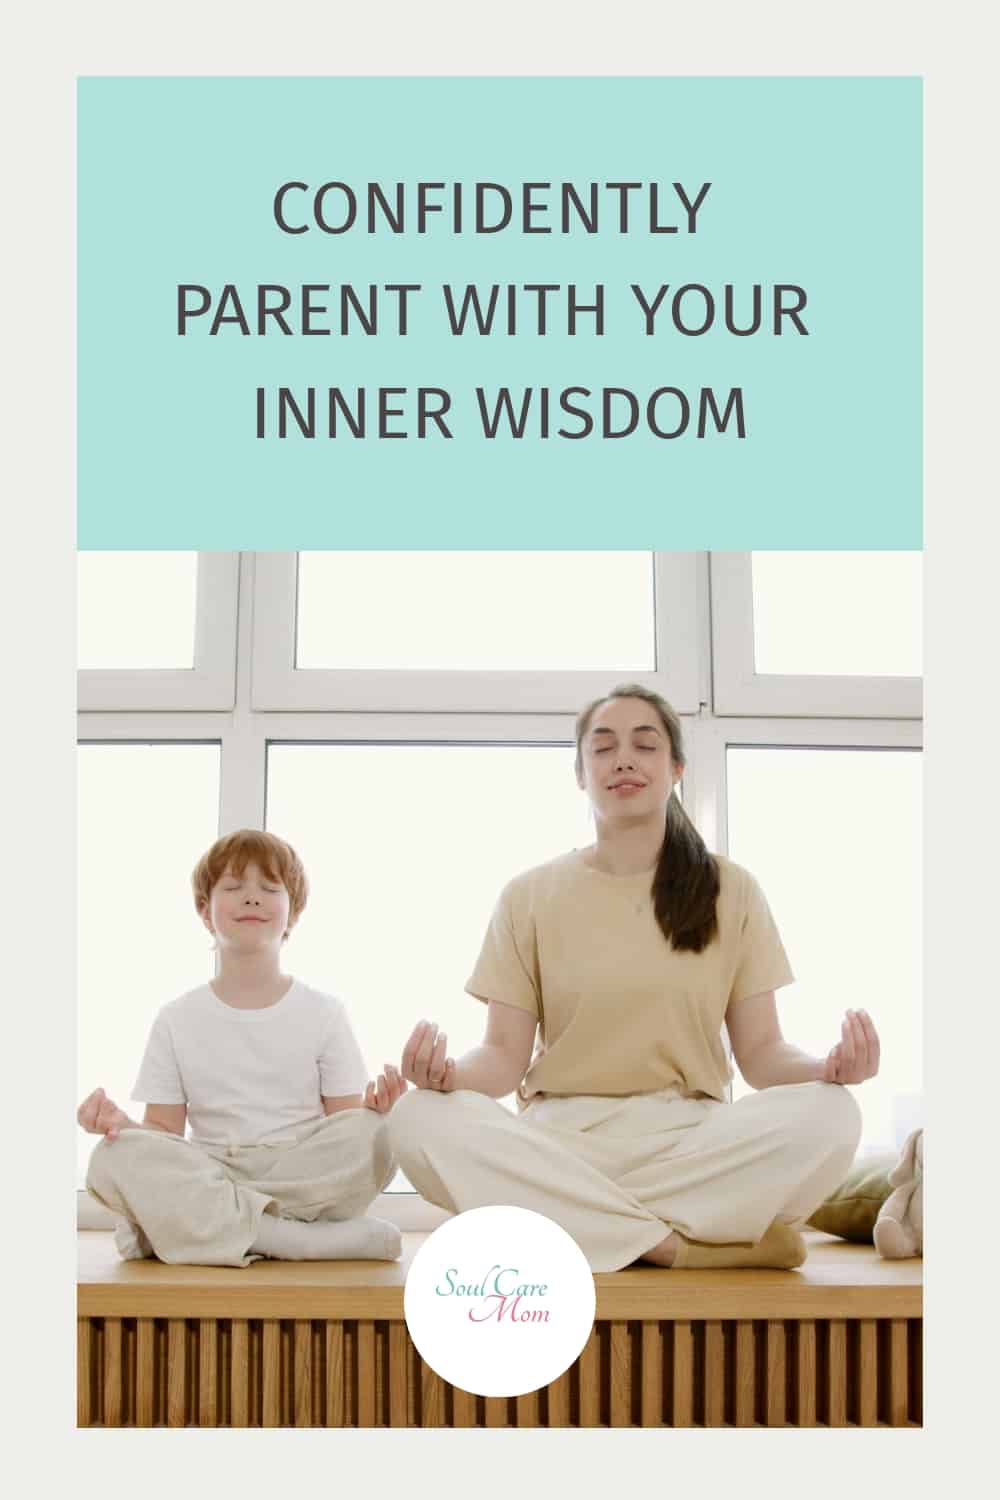 Confidently Parent With Your Inner Wisdom - Mom and child meditating